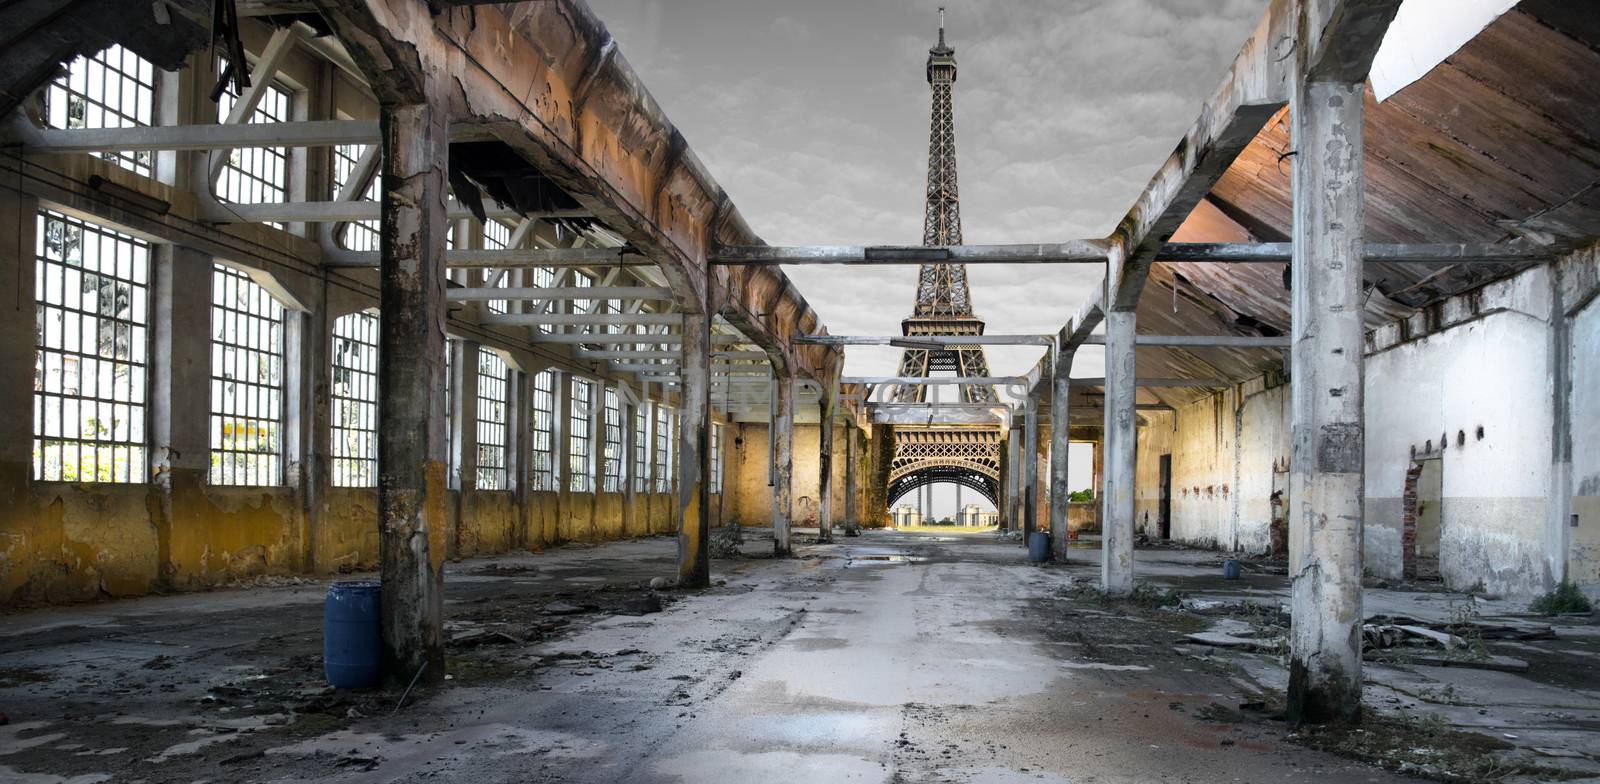 View of the post-apocalyptic Eiffel Tower